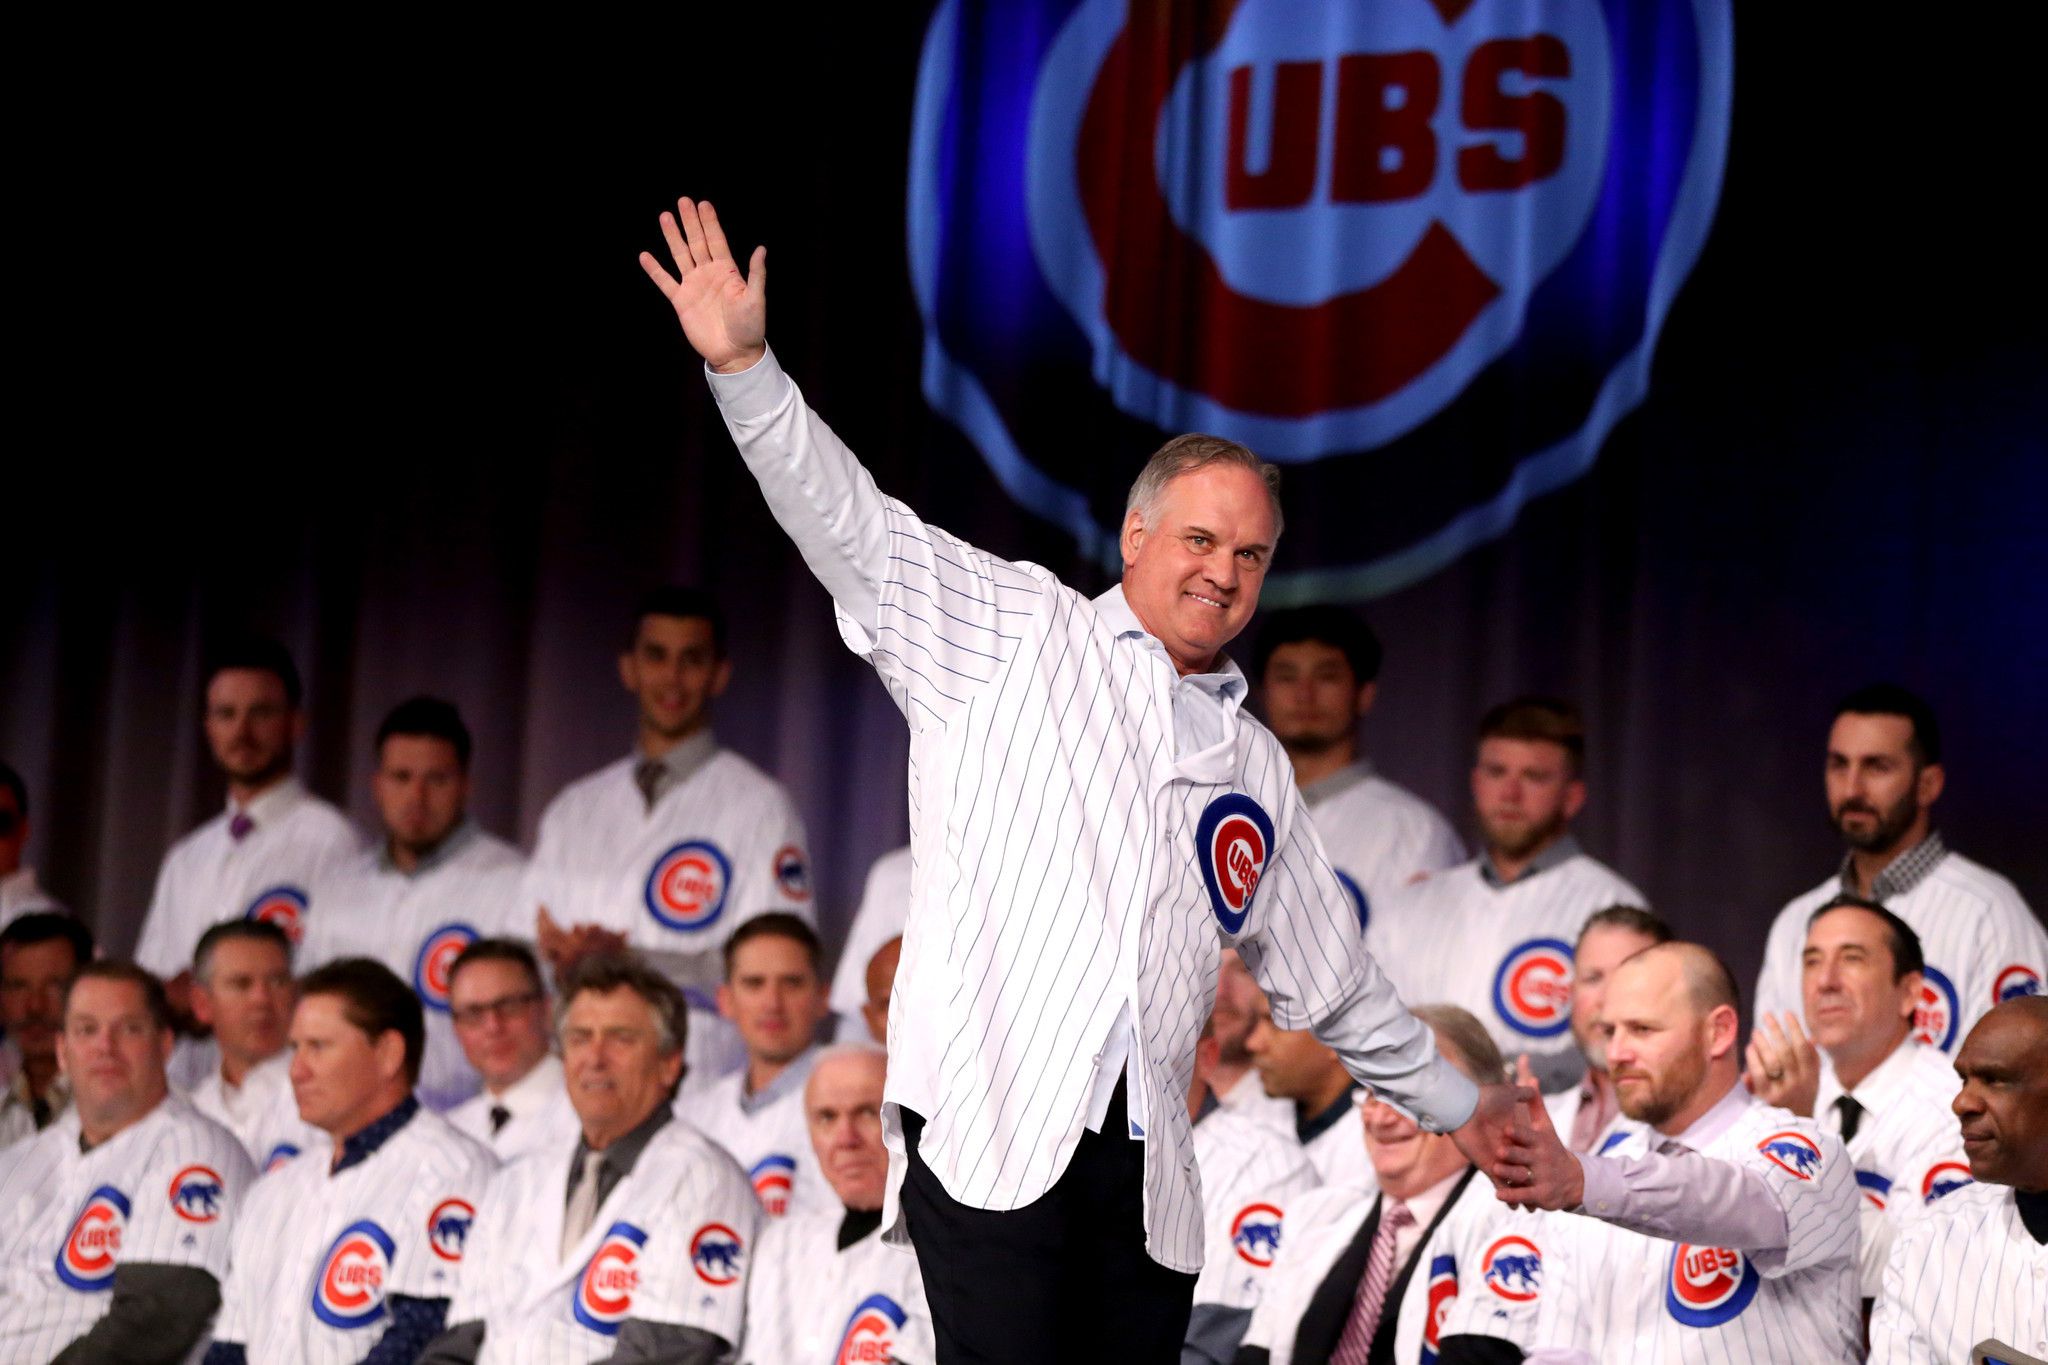 From his home in Lake Bluff, Hall of Famer Ryne Sandberg holds out hope  that the Major League Baseball season can begin in July 'if it's safe  enough for all involved